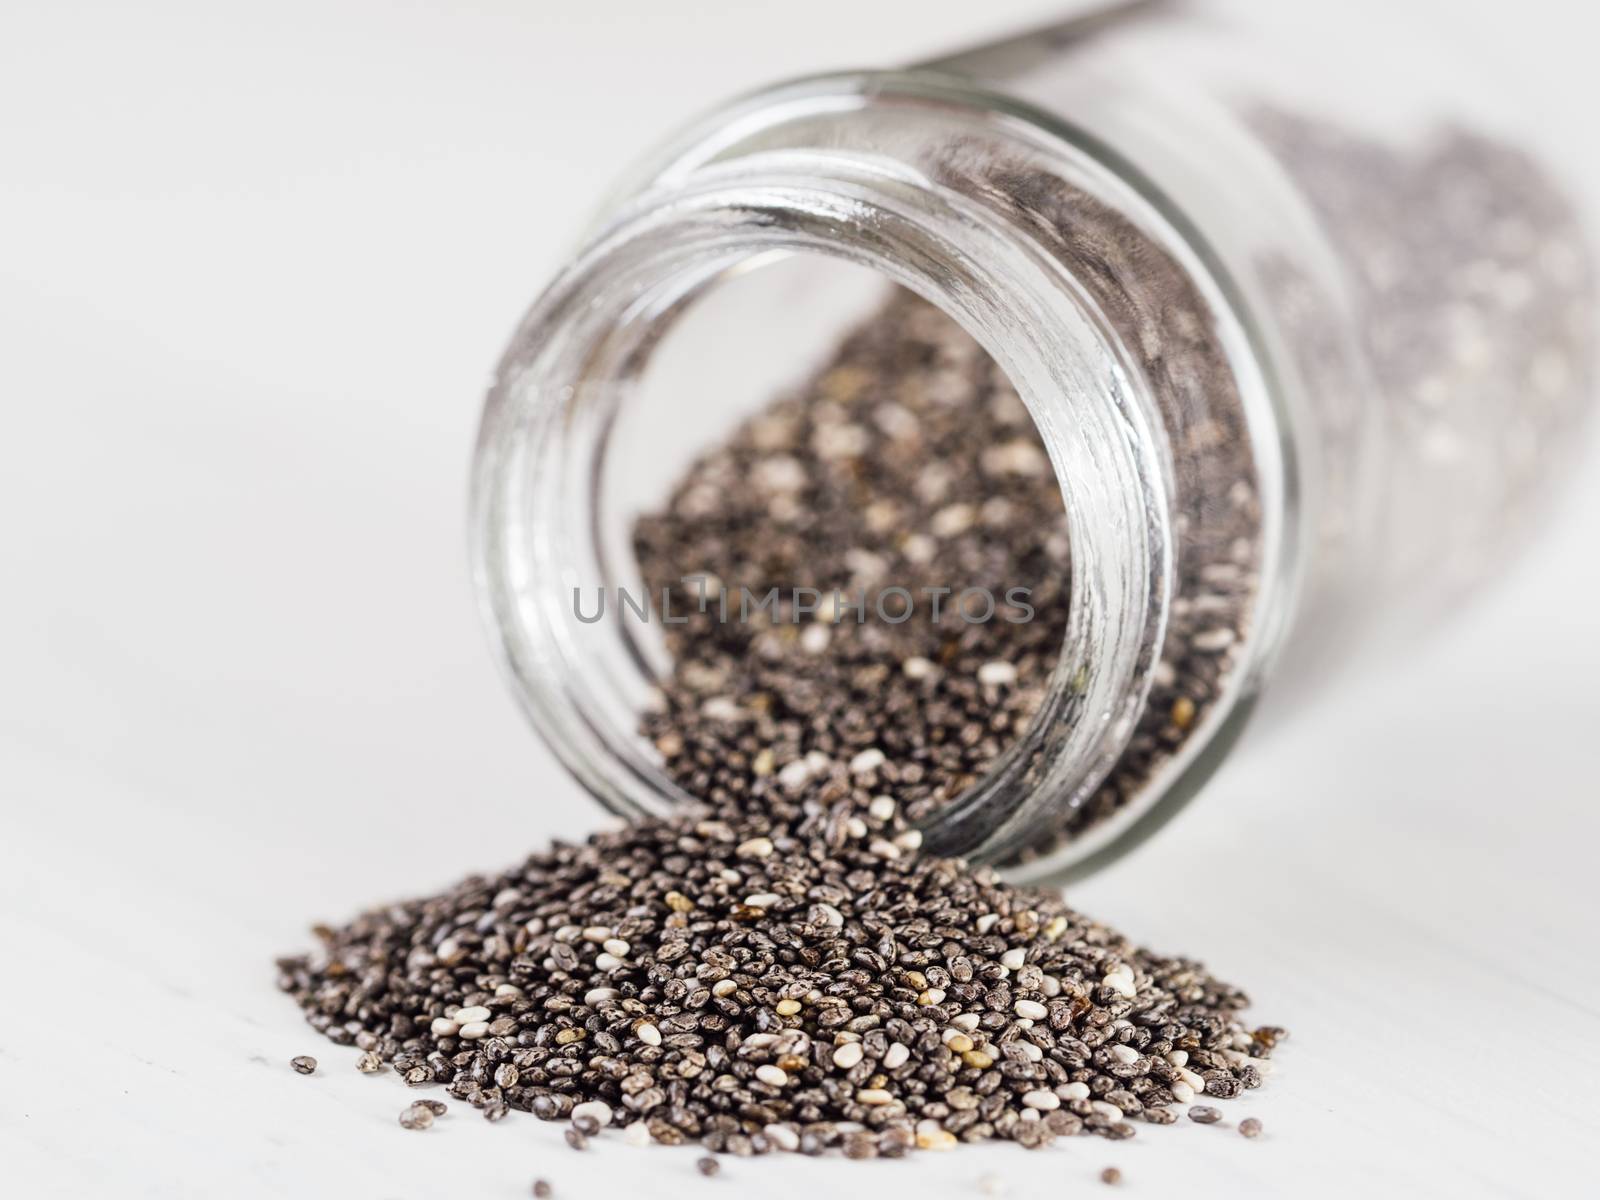 chia seeds scattered from glass jar on white background. Copy space.